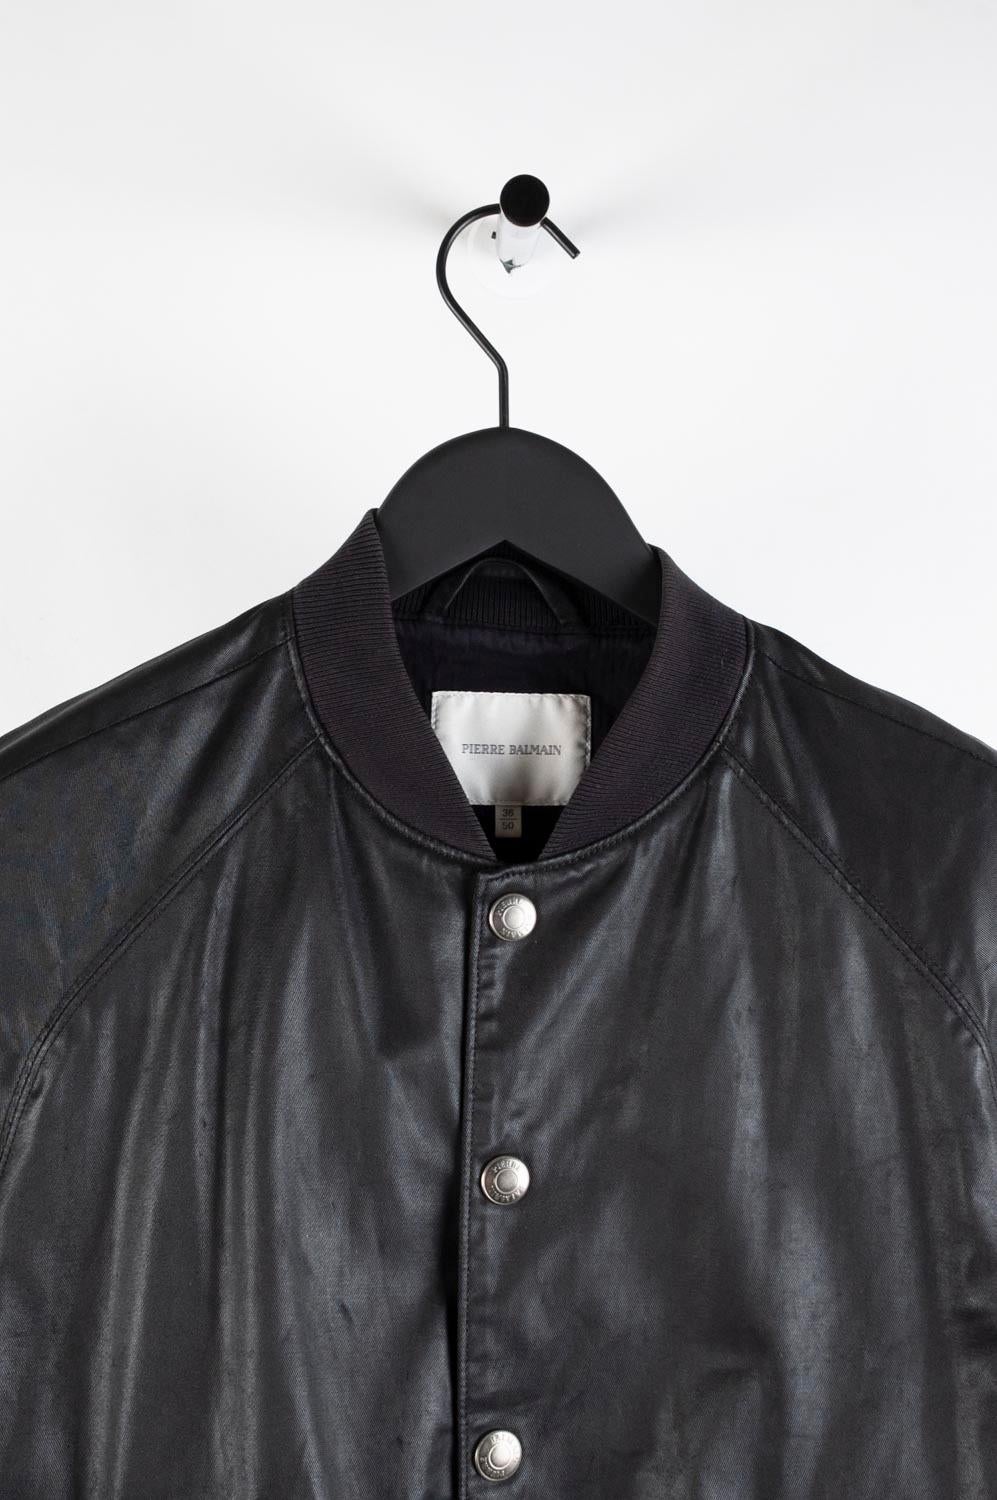 Item for sale is 100% genuine Pierre Balmain Men Bomber Jacket, S318
Color: Black/leather effect
(An actual color may a bit vary due to individual computer screen interpretation)
Material: 95% cotton, 5% polyurethane
Tag size: 50 (M) 
This jacket is